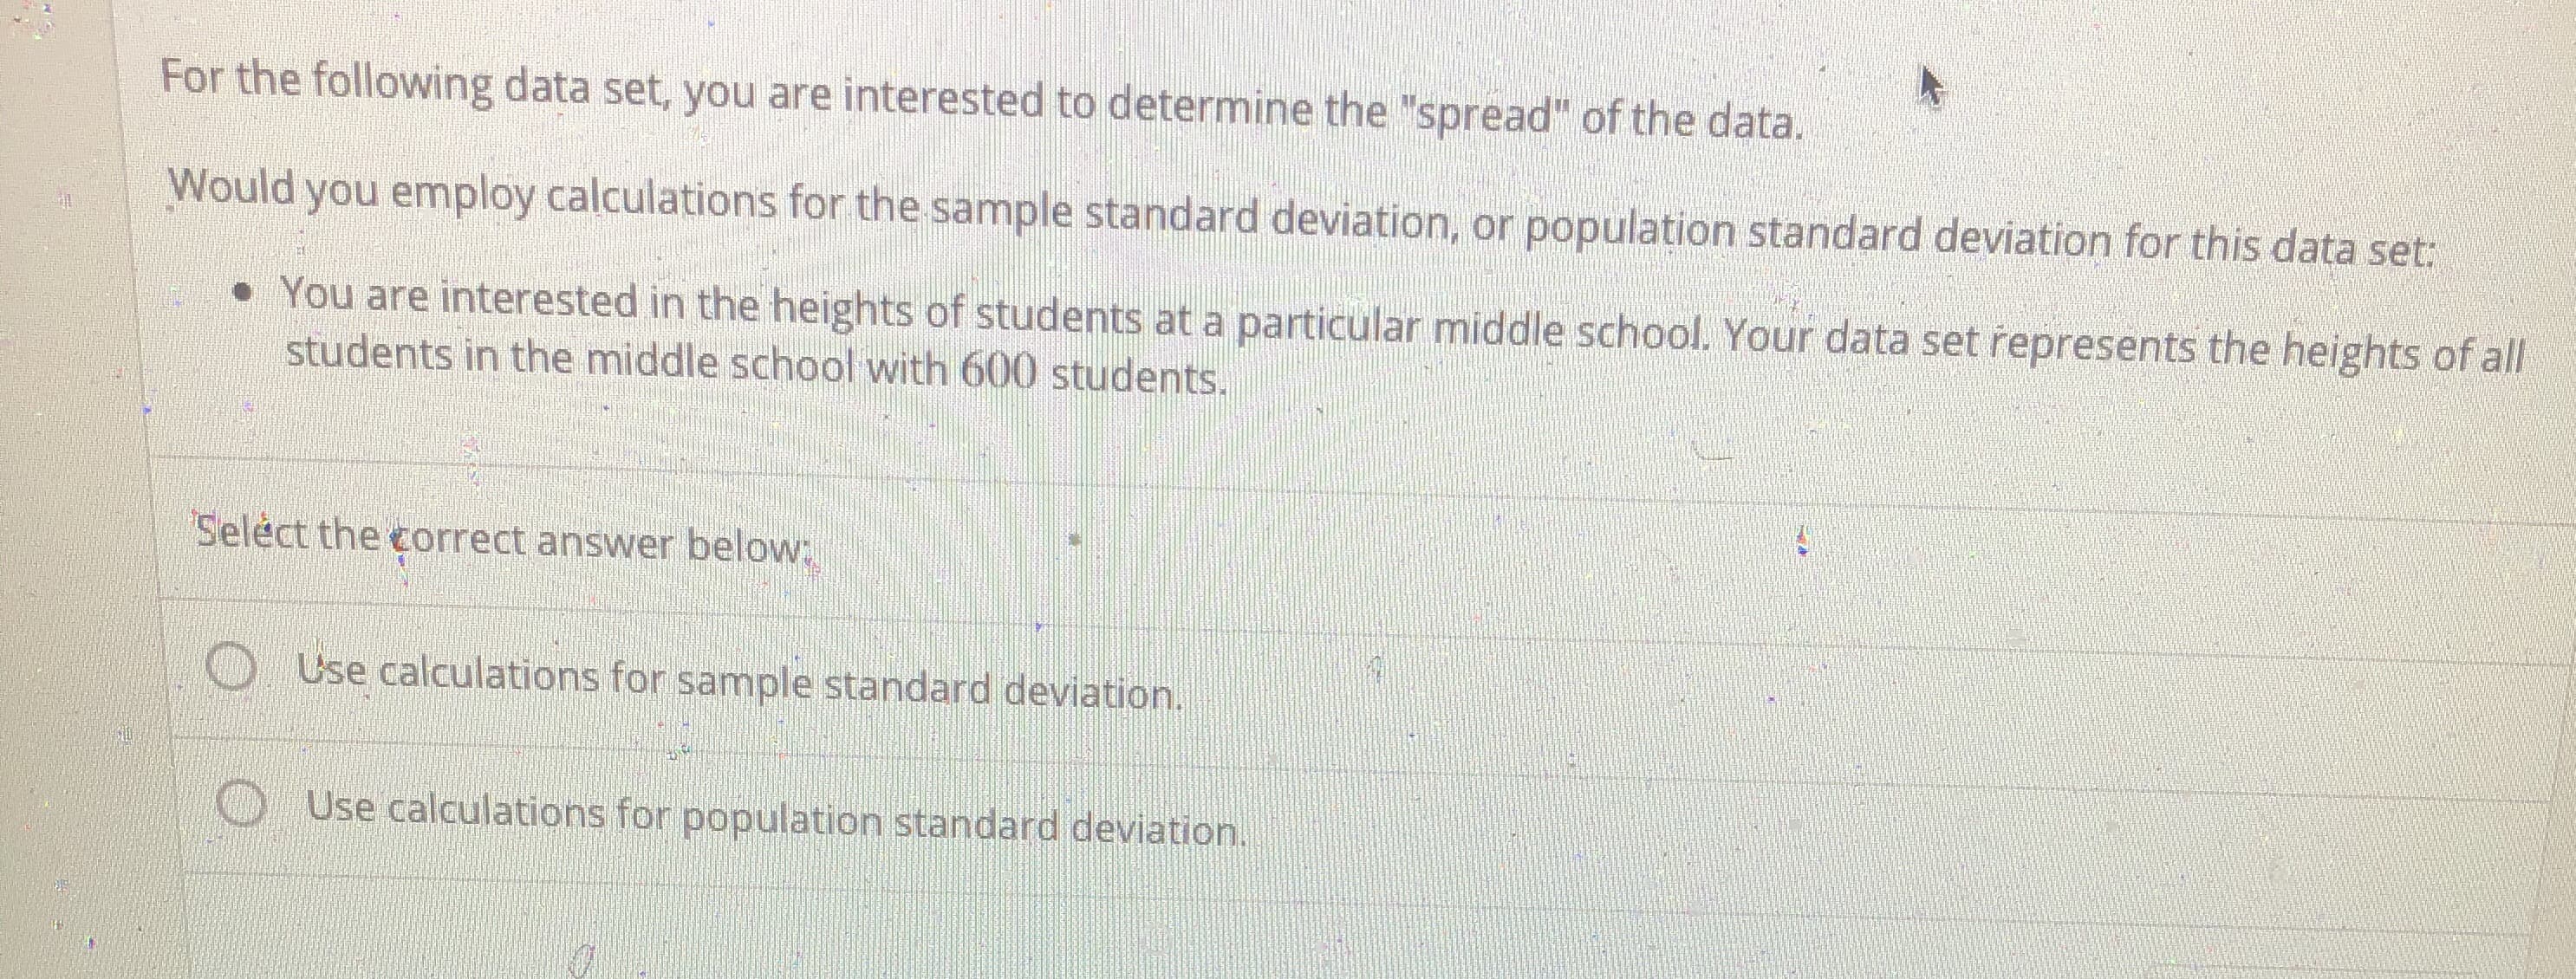 e Interested in the heights of students at a particular middle school. Your data set represents the heights of all
students in the middle school with 600 students.
